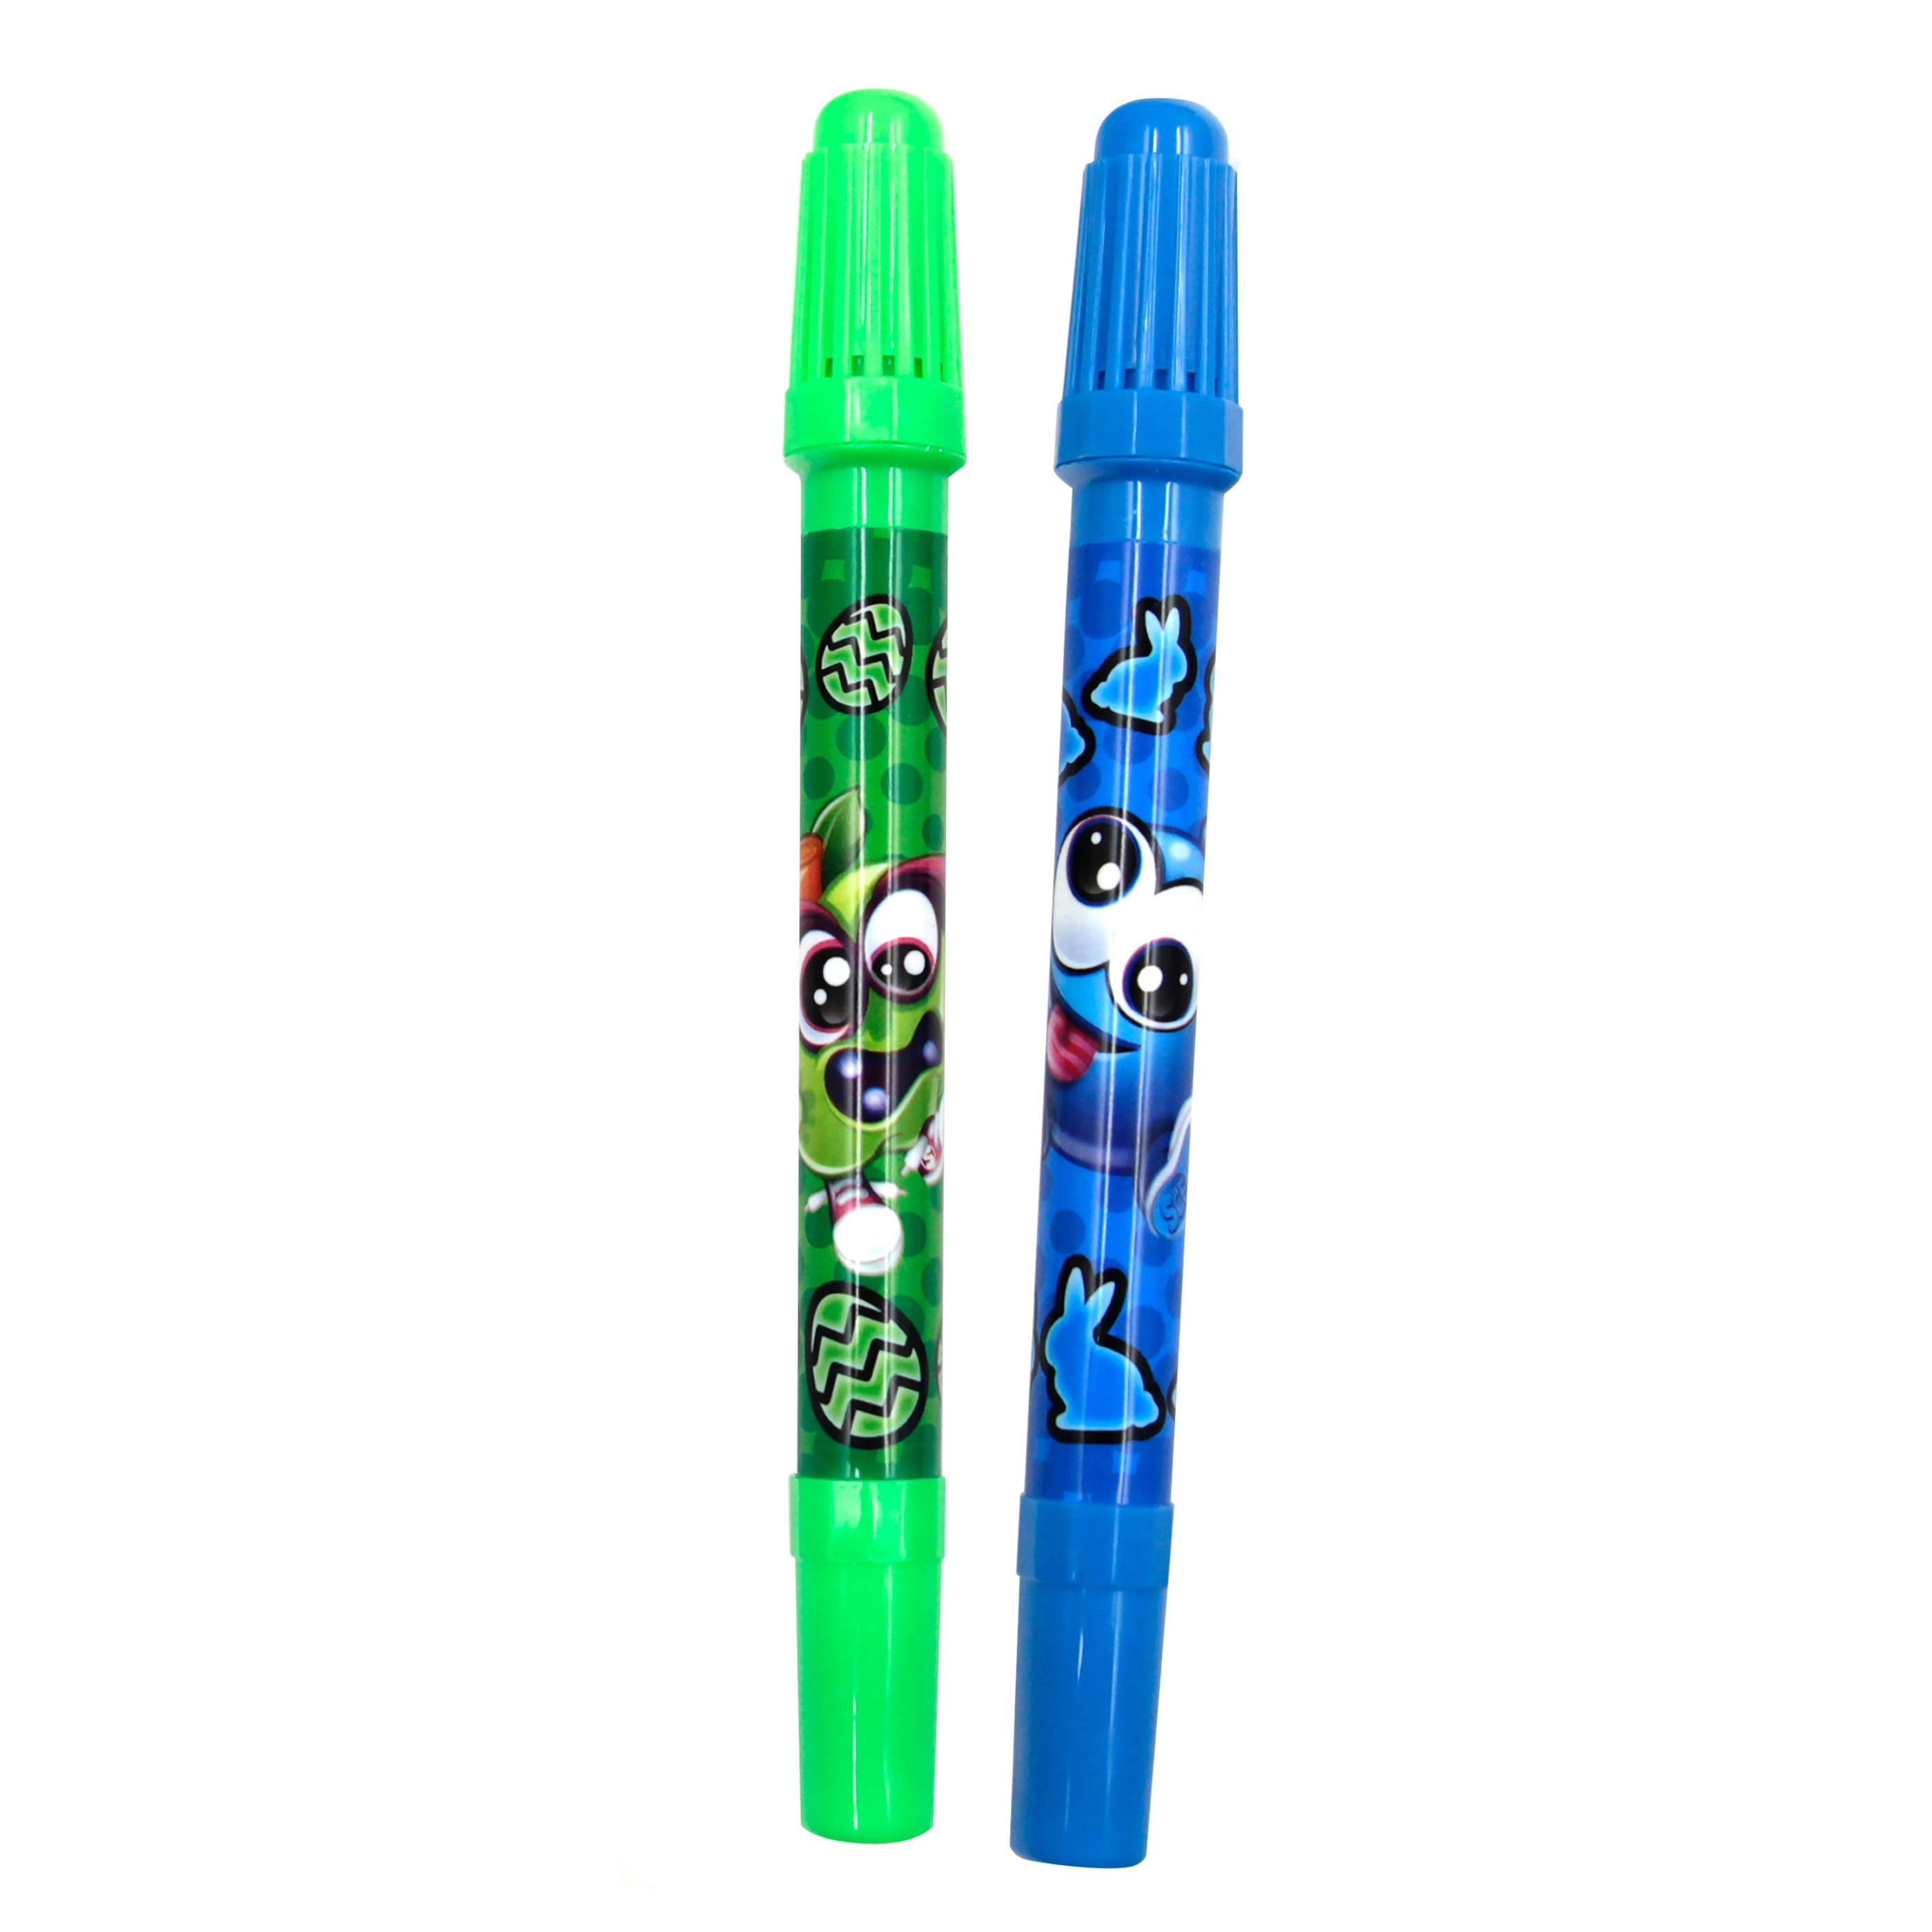 Buy Scentos Scented Markers (3 Pieces) Online in Dubai & the UAE